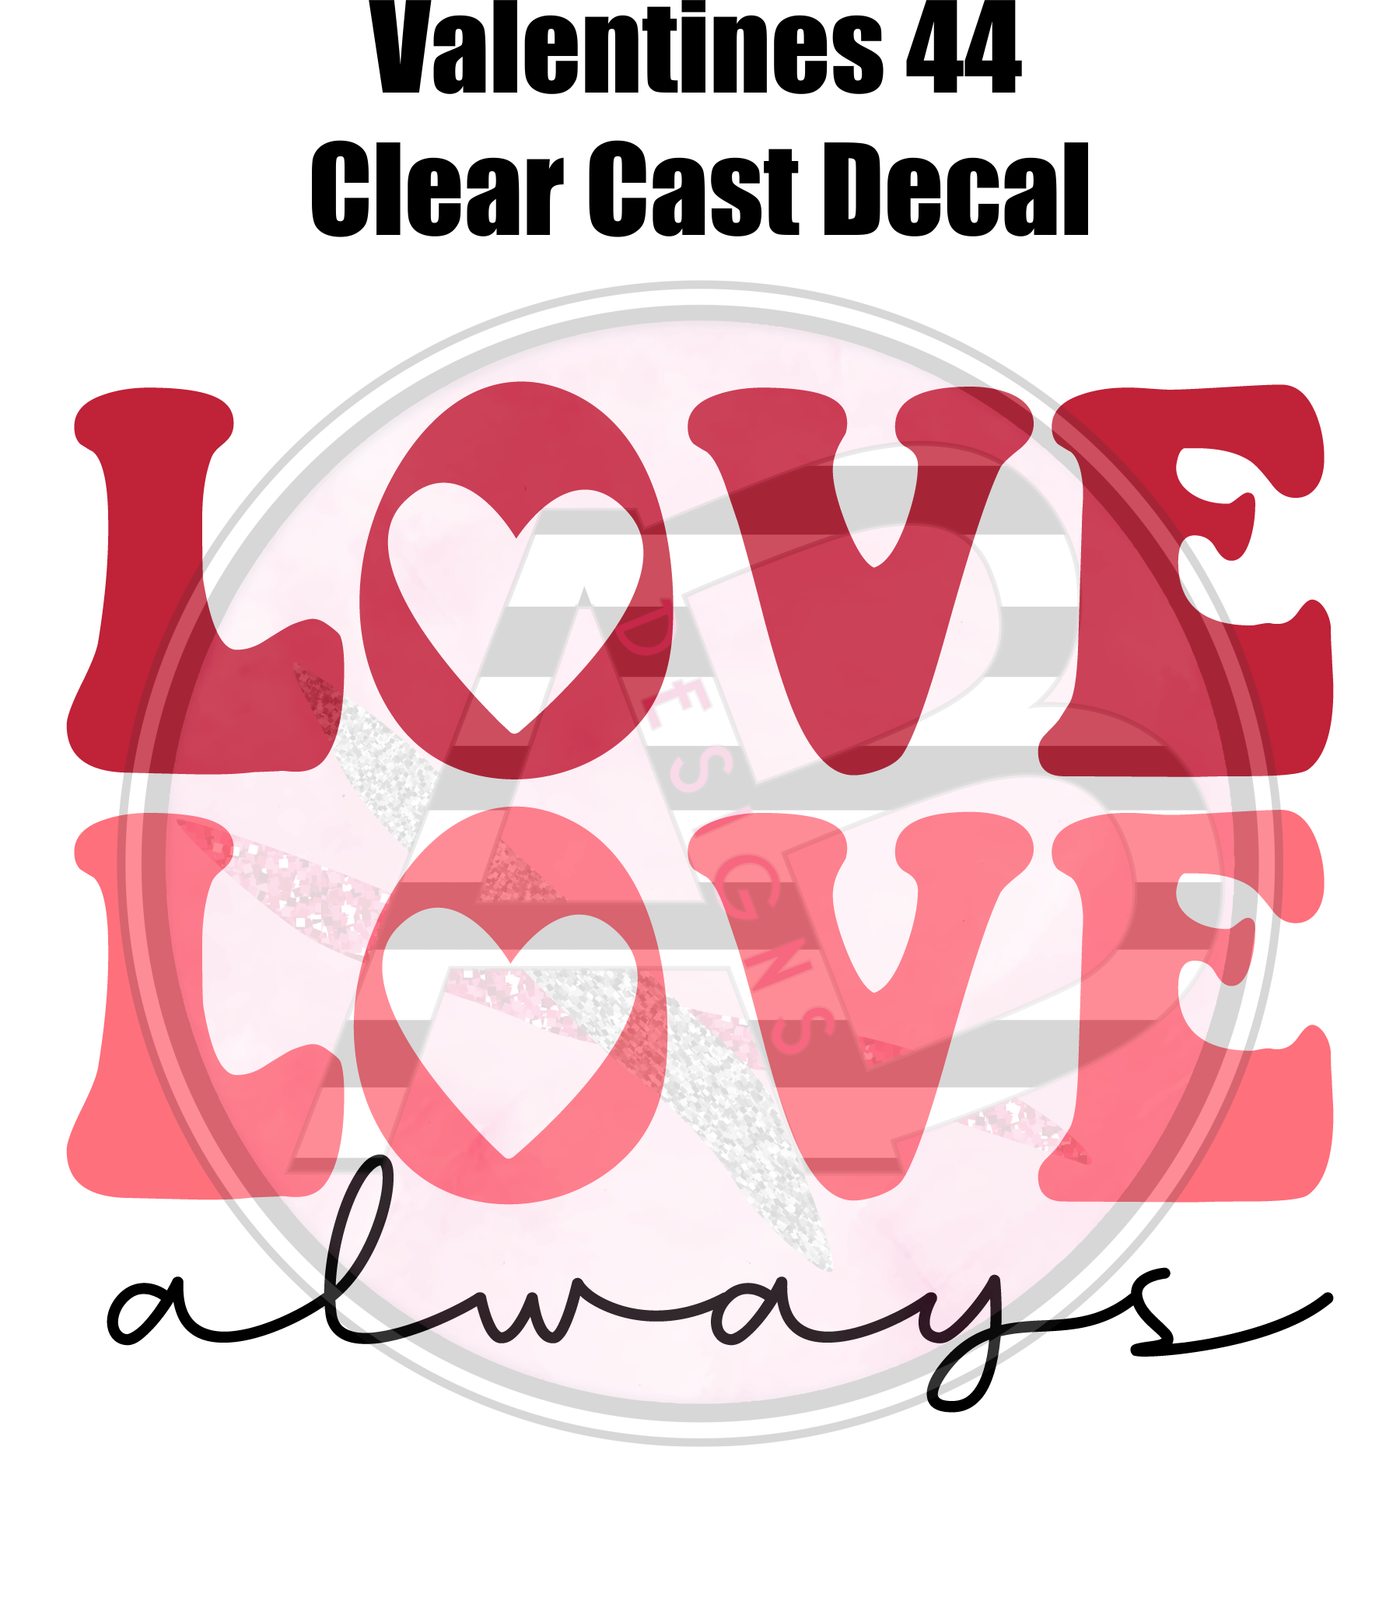 Valentines 44 - Clear Cast Decal